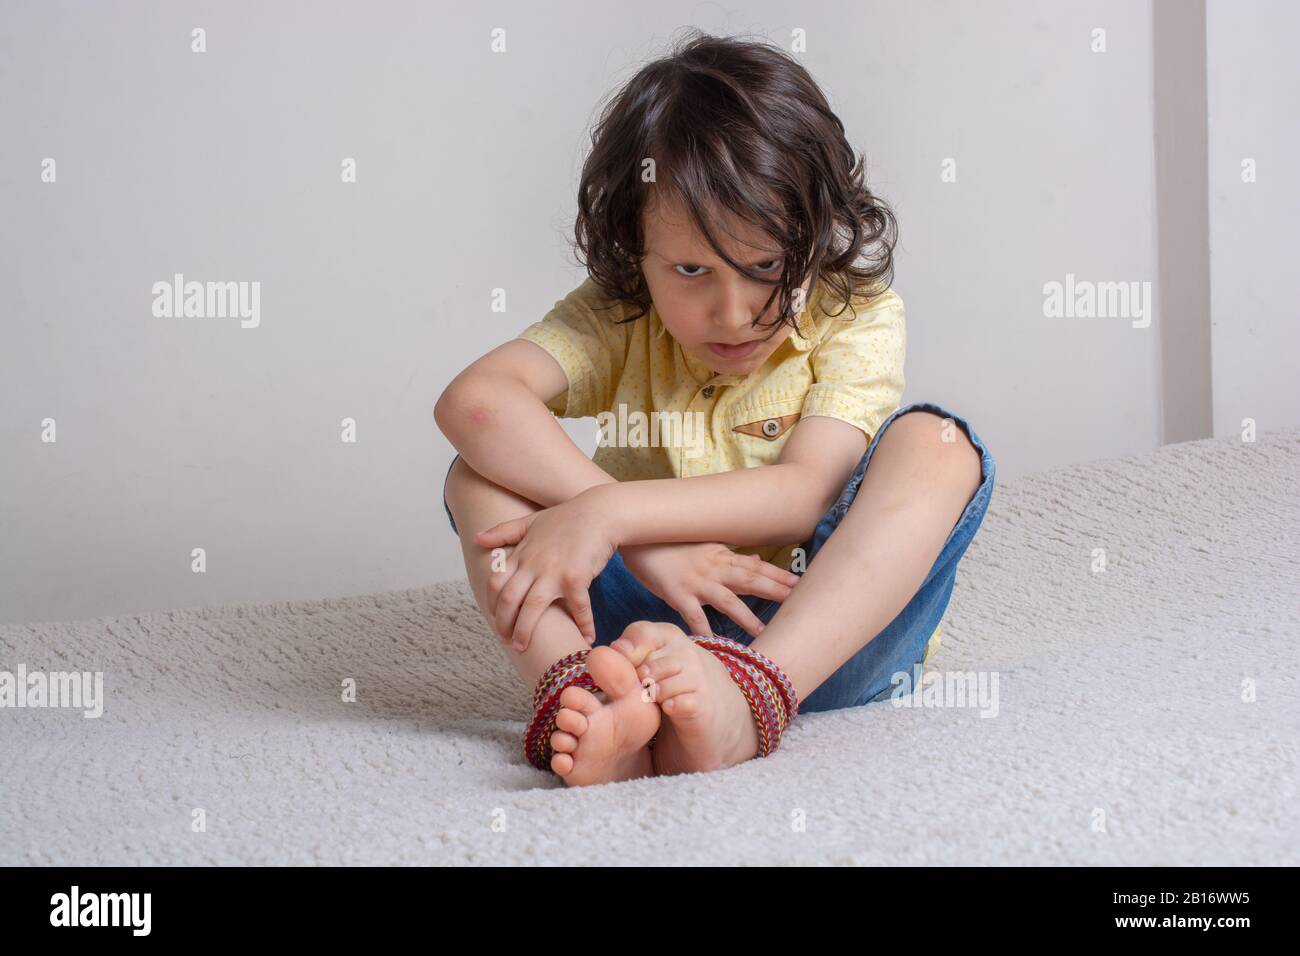 Little Boy With Feet Tied Up With Rope In Emotional Stress Stock Photo Alamy Our website is dedicated to beautiful female feet. https www alamy com little boy with feet tied up with rope in emotional stress image344974033 html